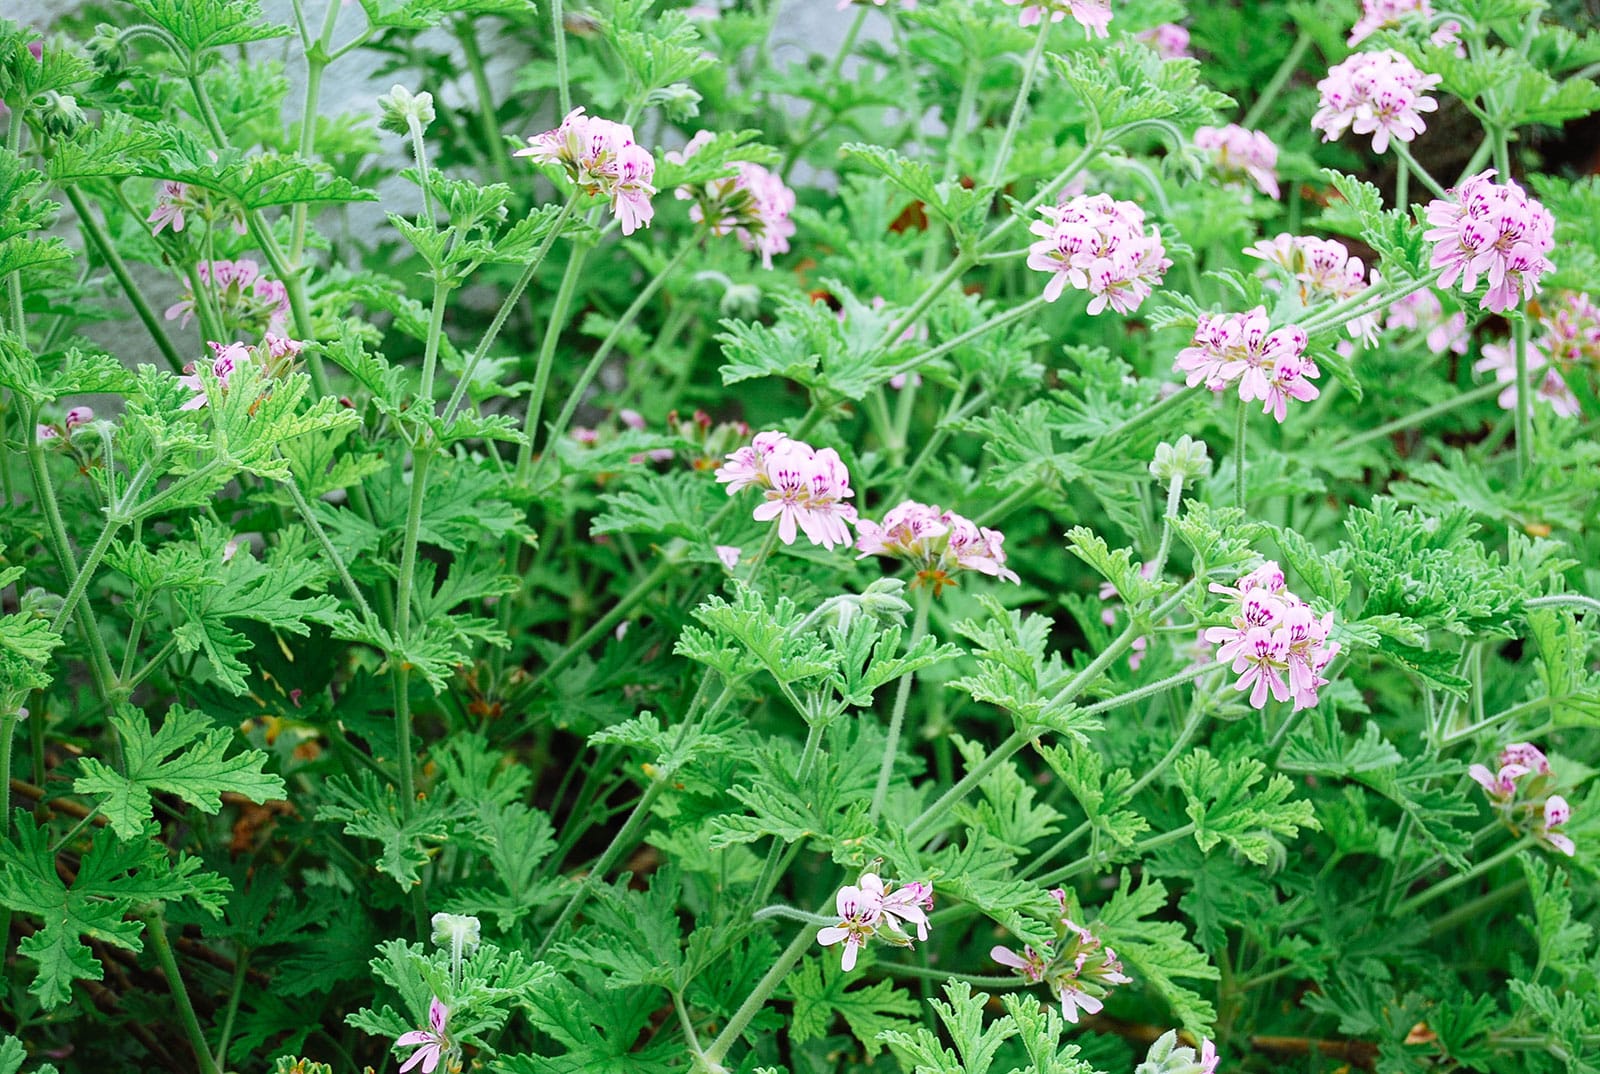 Pelargonium 'Citrosum' (citronella plant) with several clusters of pink flowers being grown outside